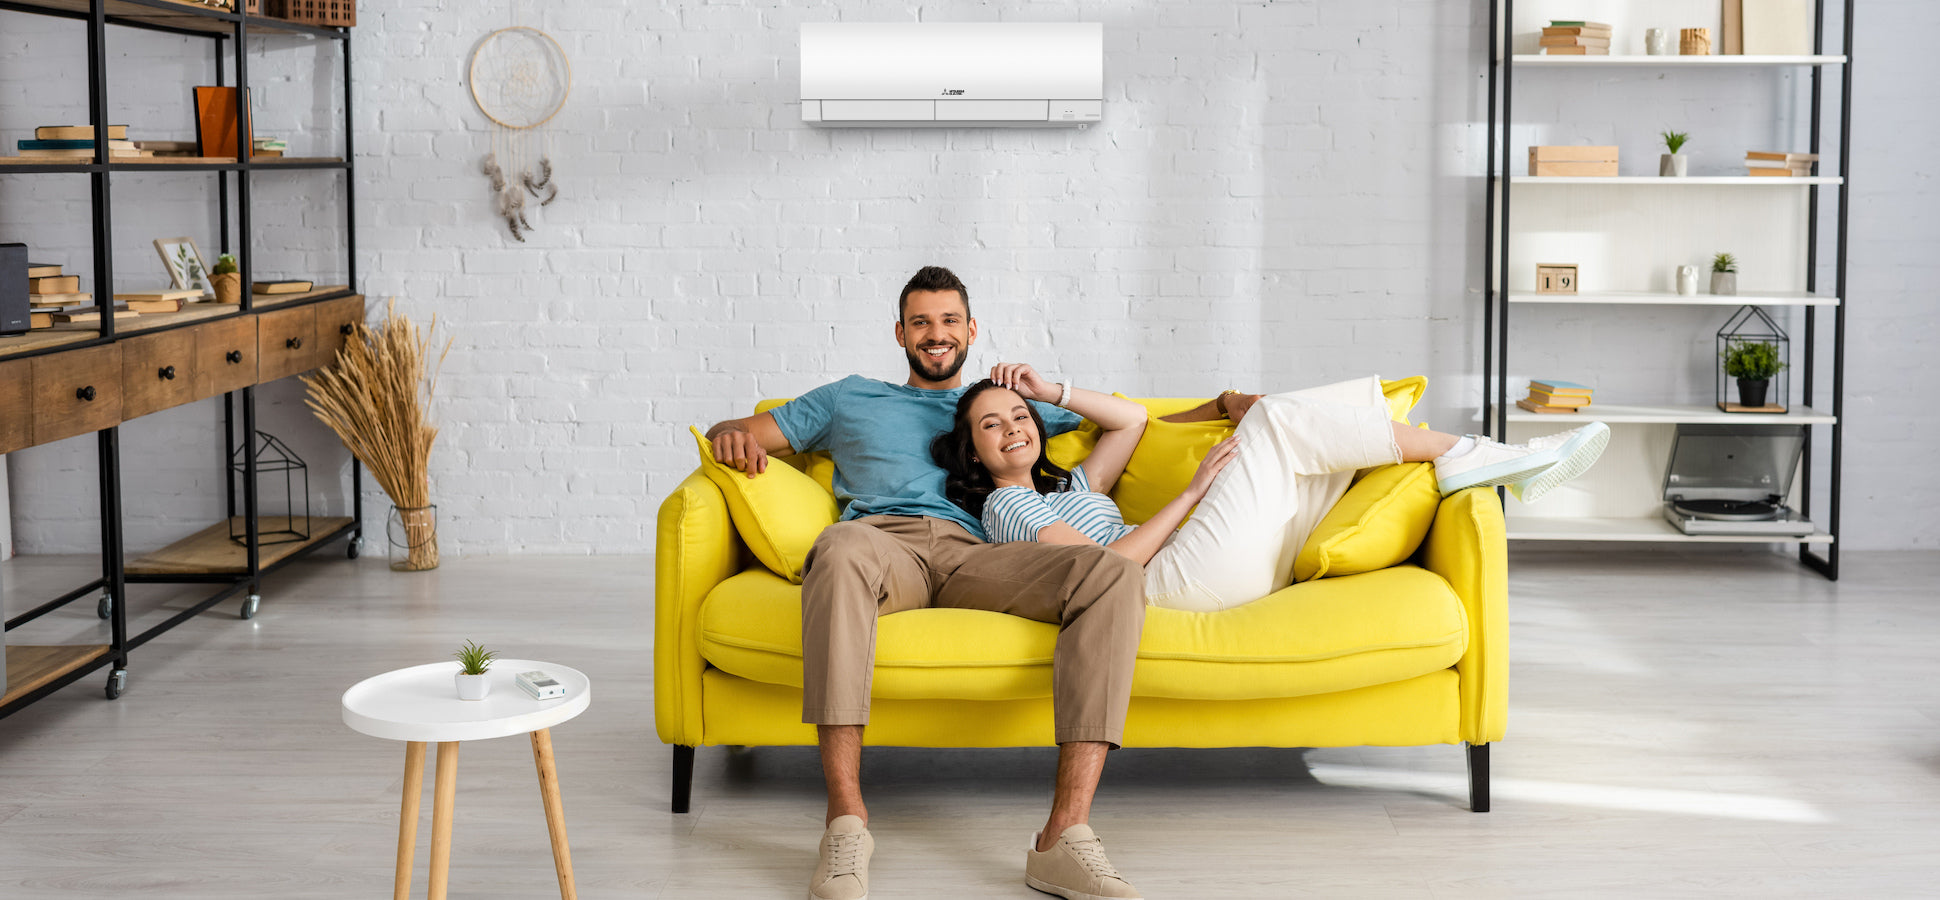 D Air Conditioning  Specialize in Ductless Mini Split and VRF HVAC –  d-airconditioning